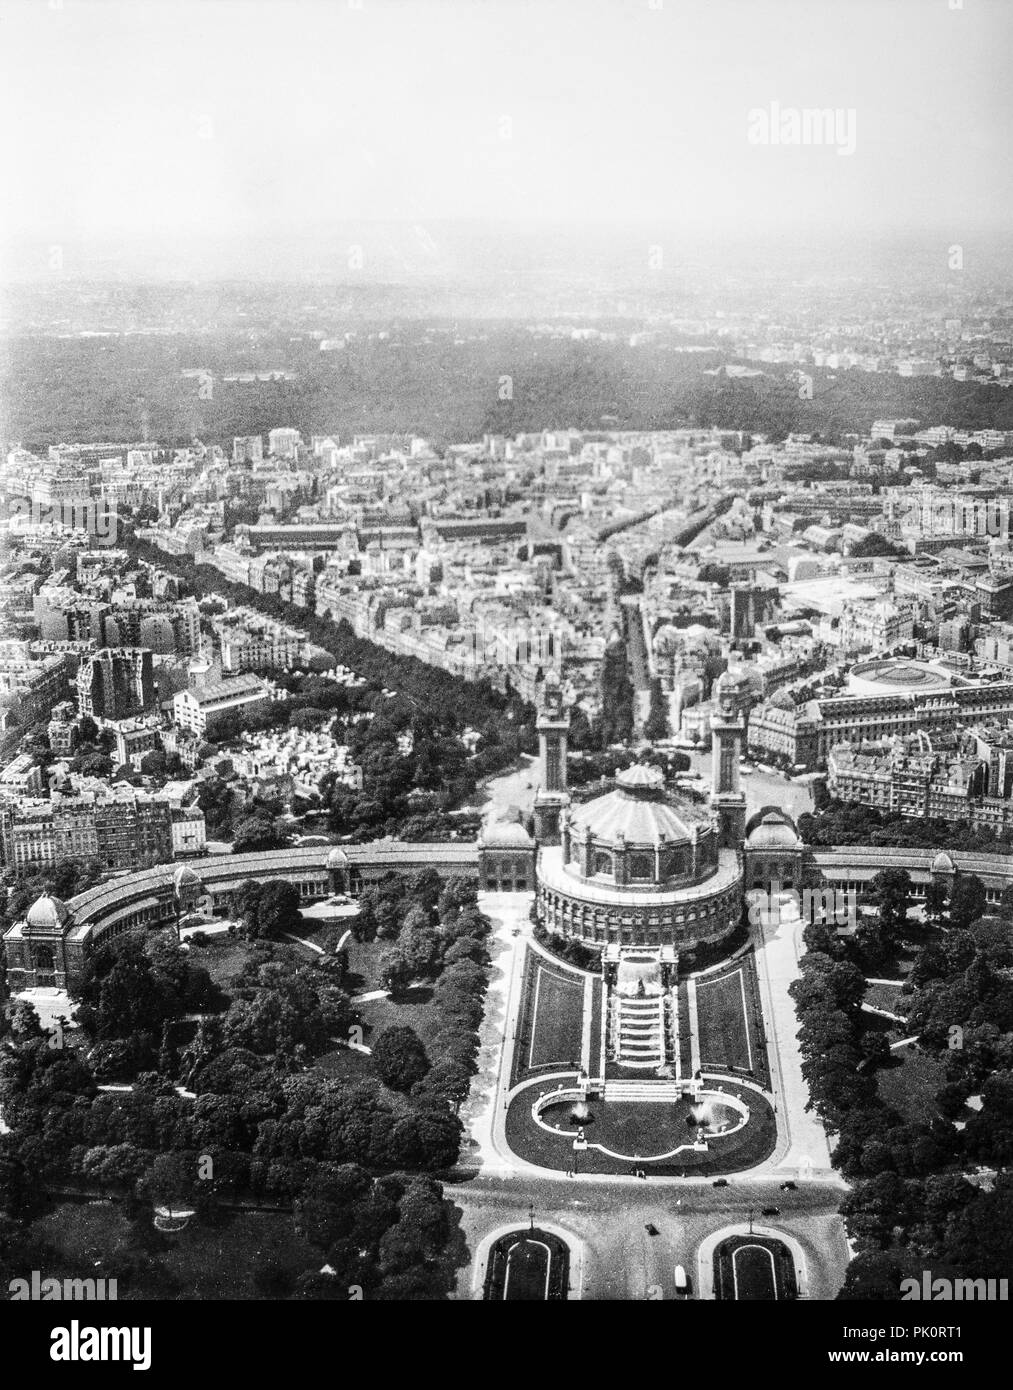 View from the top of the Eiffel Tower in Paris 1931. Stock Photo